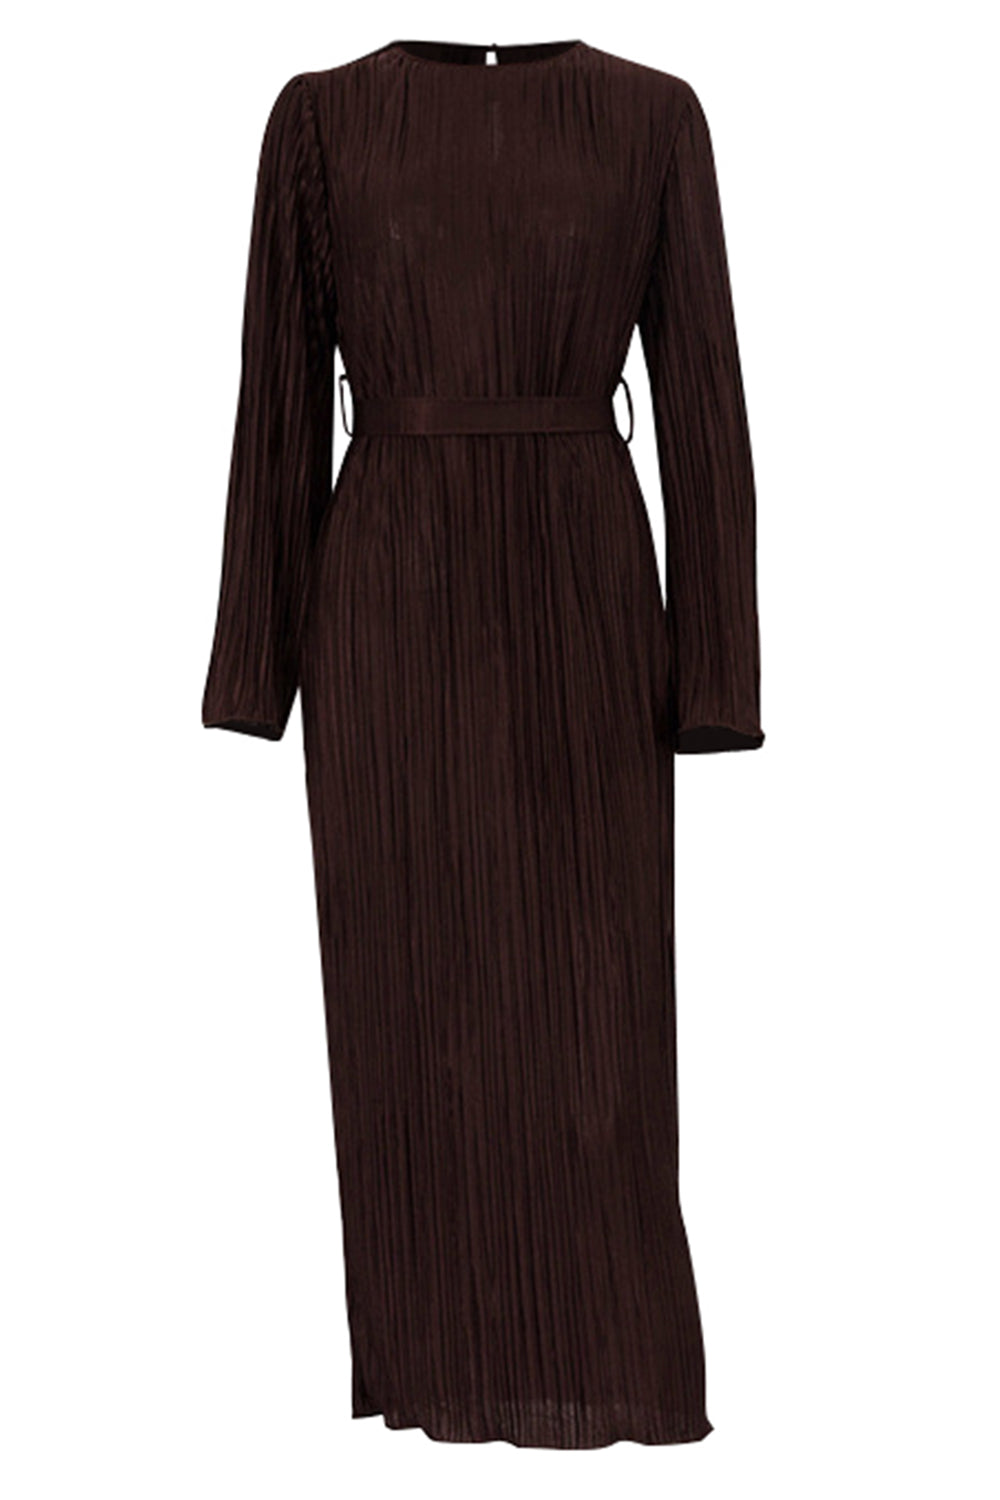 Textured Tied Round Neck Long Sleeve Dress